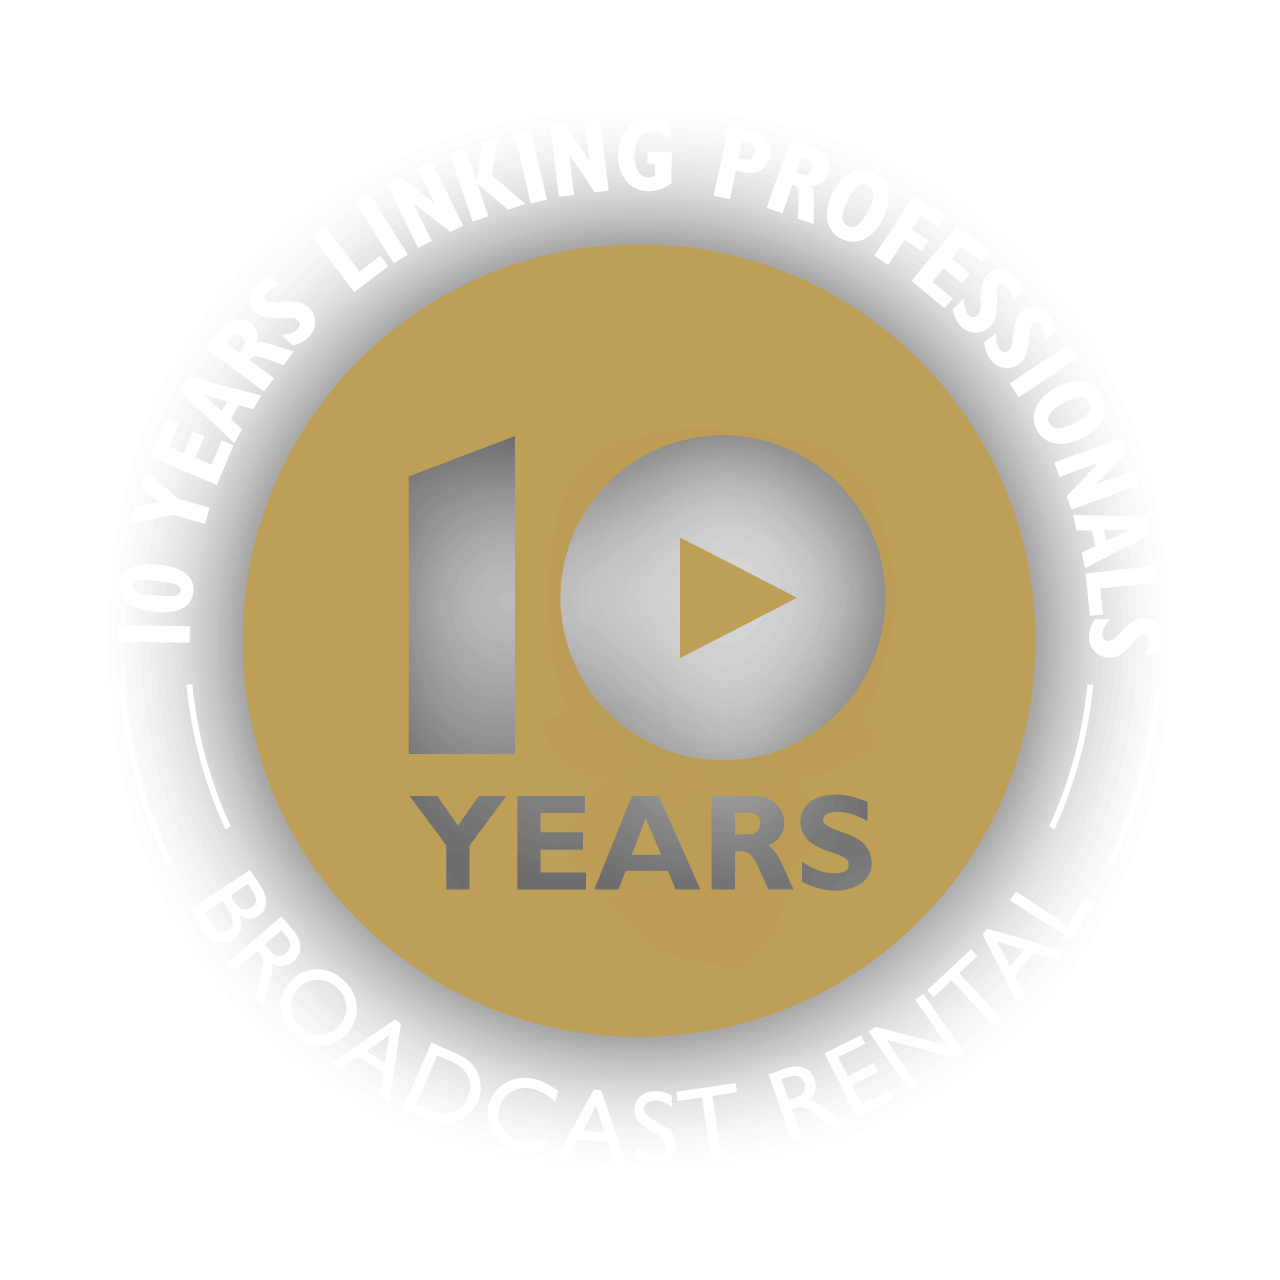 A decade of linking professionals